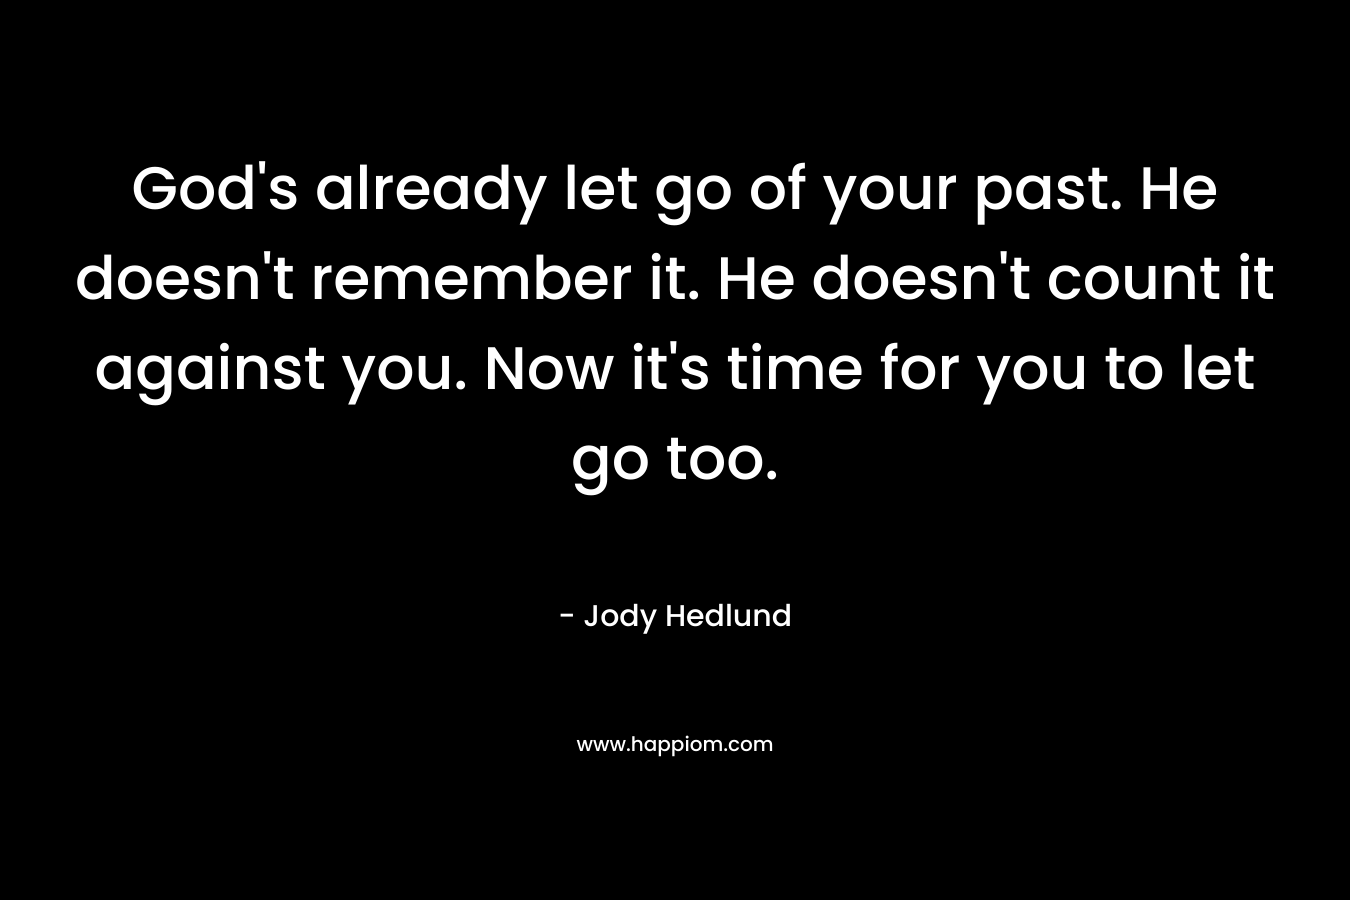 God’s already let go of your past. He doesn’t remember it. He doesn’t count it against you. Now it’s time for you to let go too. – Jody Hedlund